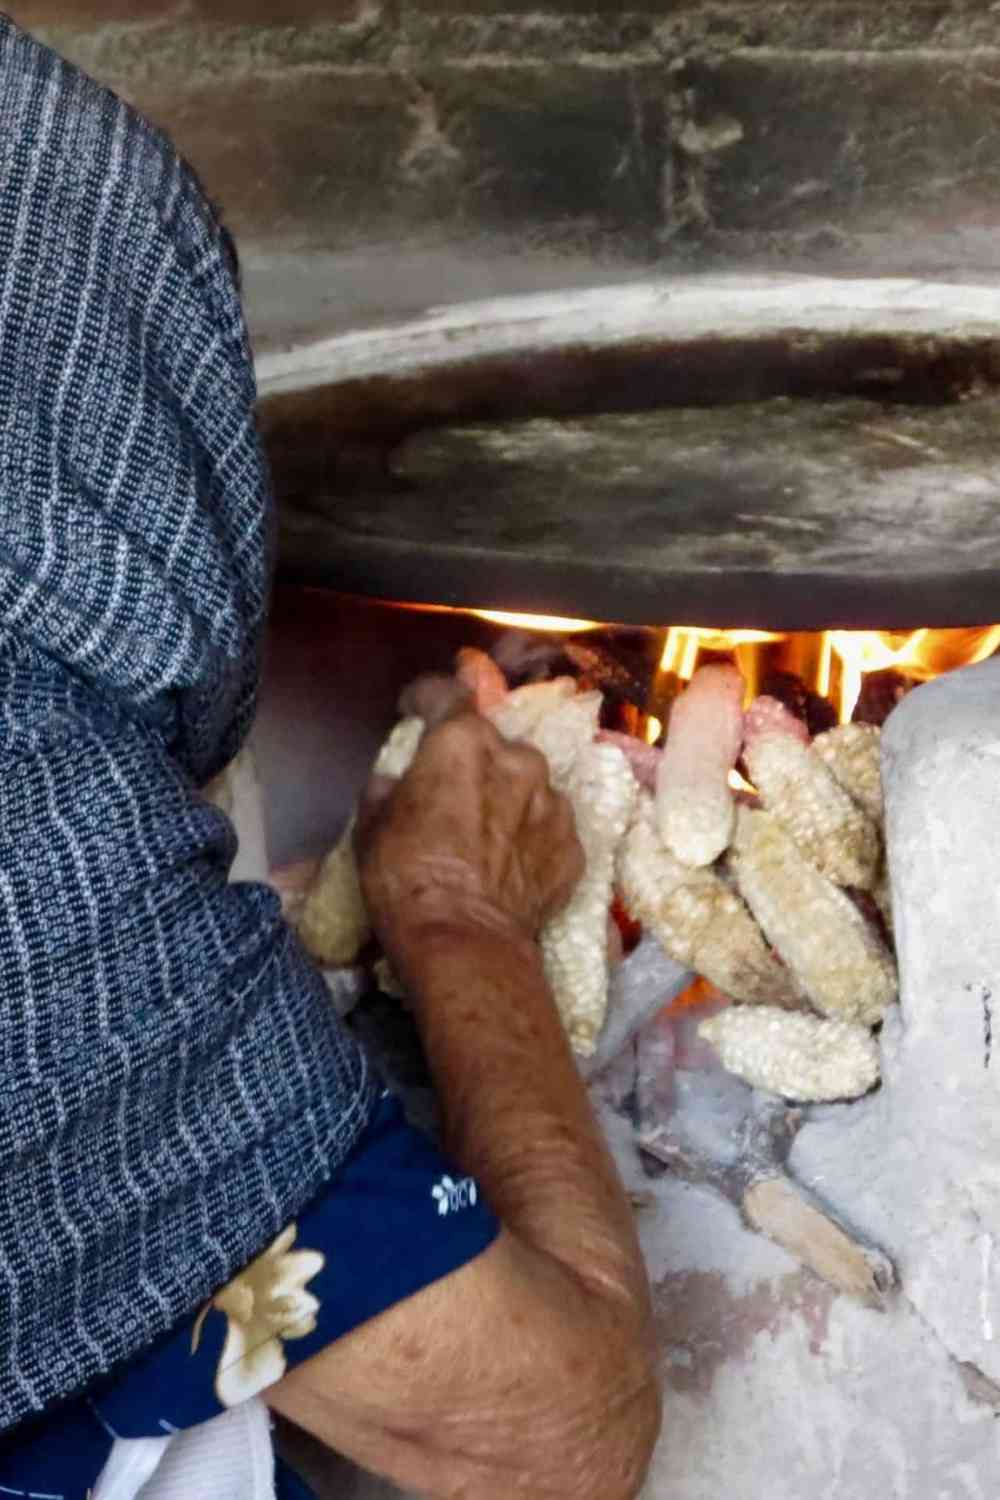 an older woman with a blue headscarf putting dried corn inside a fire stove to make tortillas